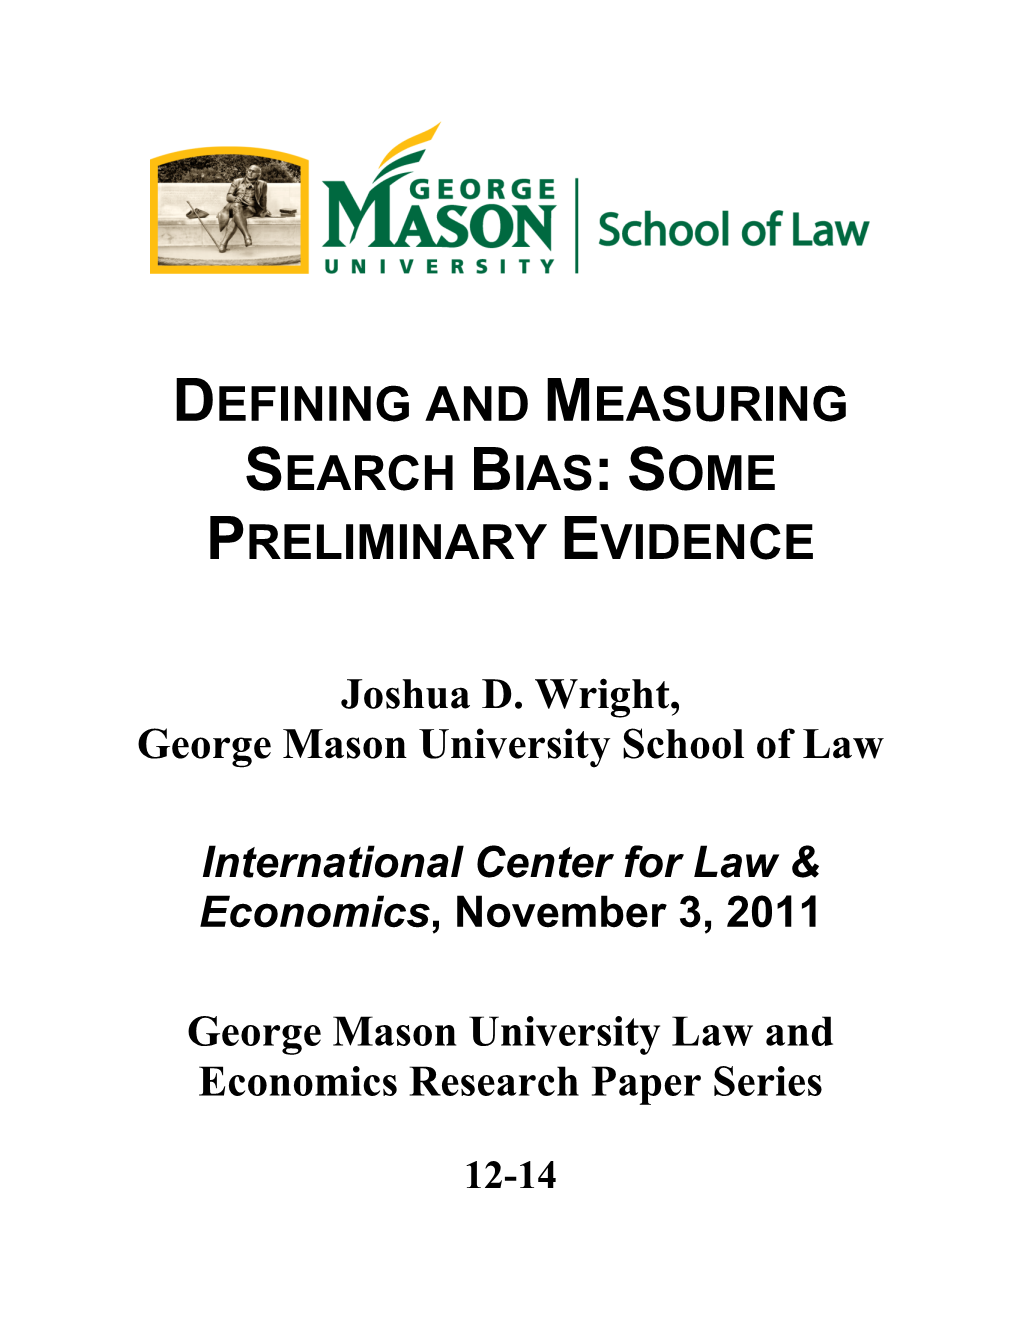 Defining and Measuring Search Bias: Some Preliminary Evidence